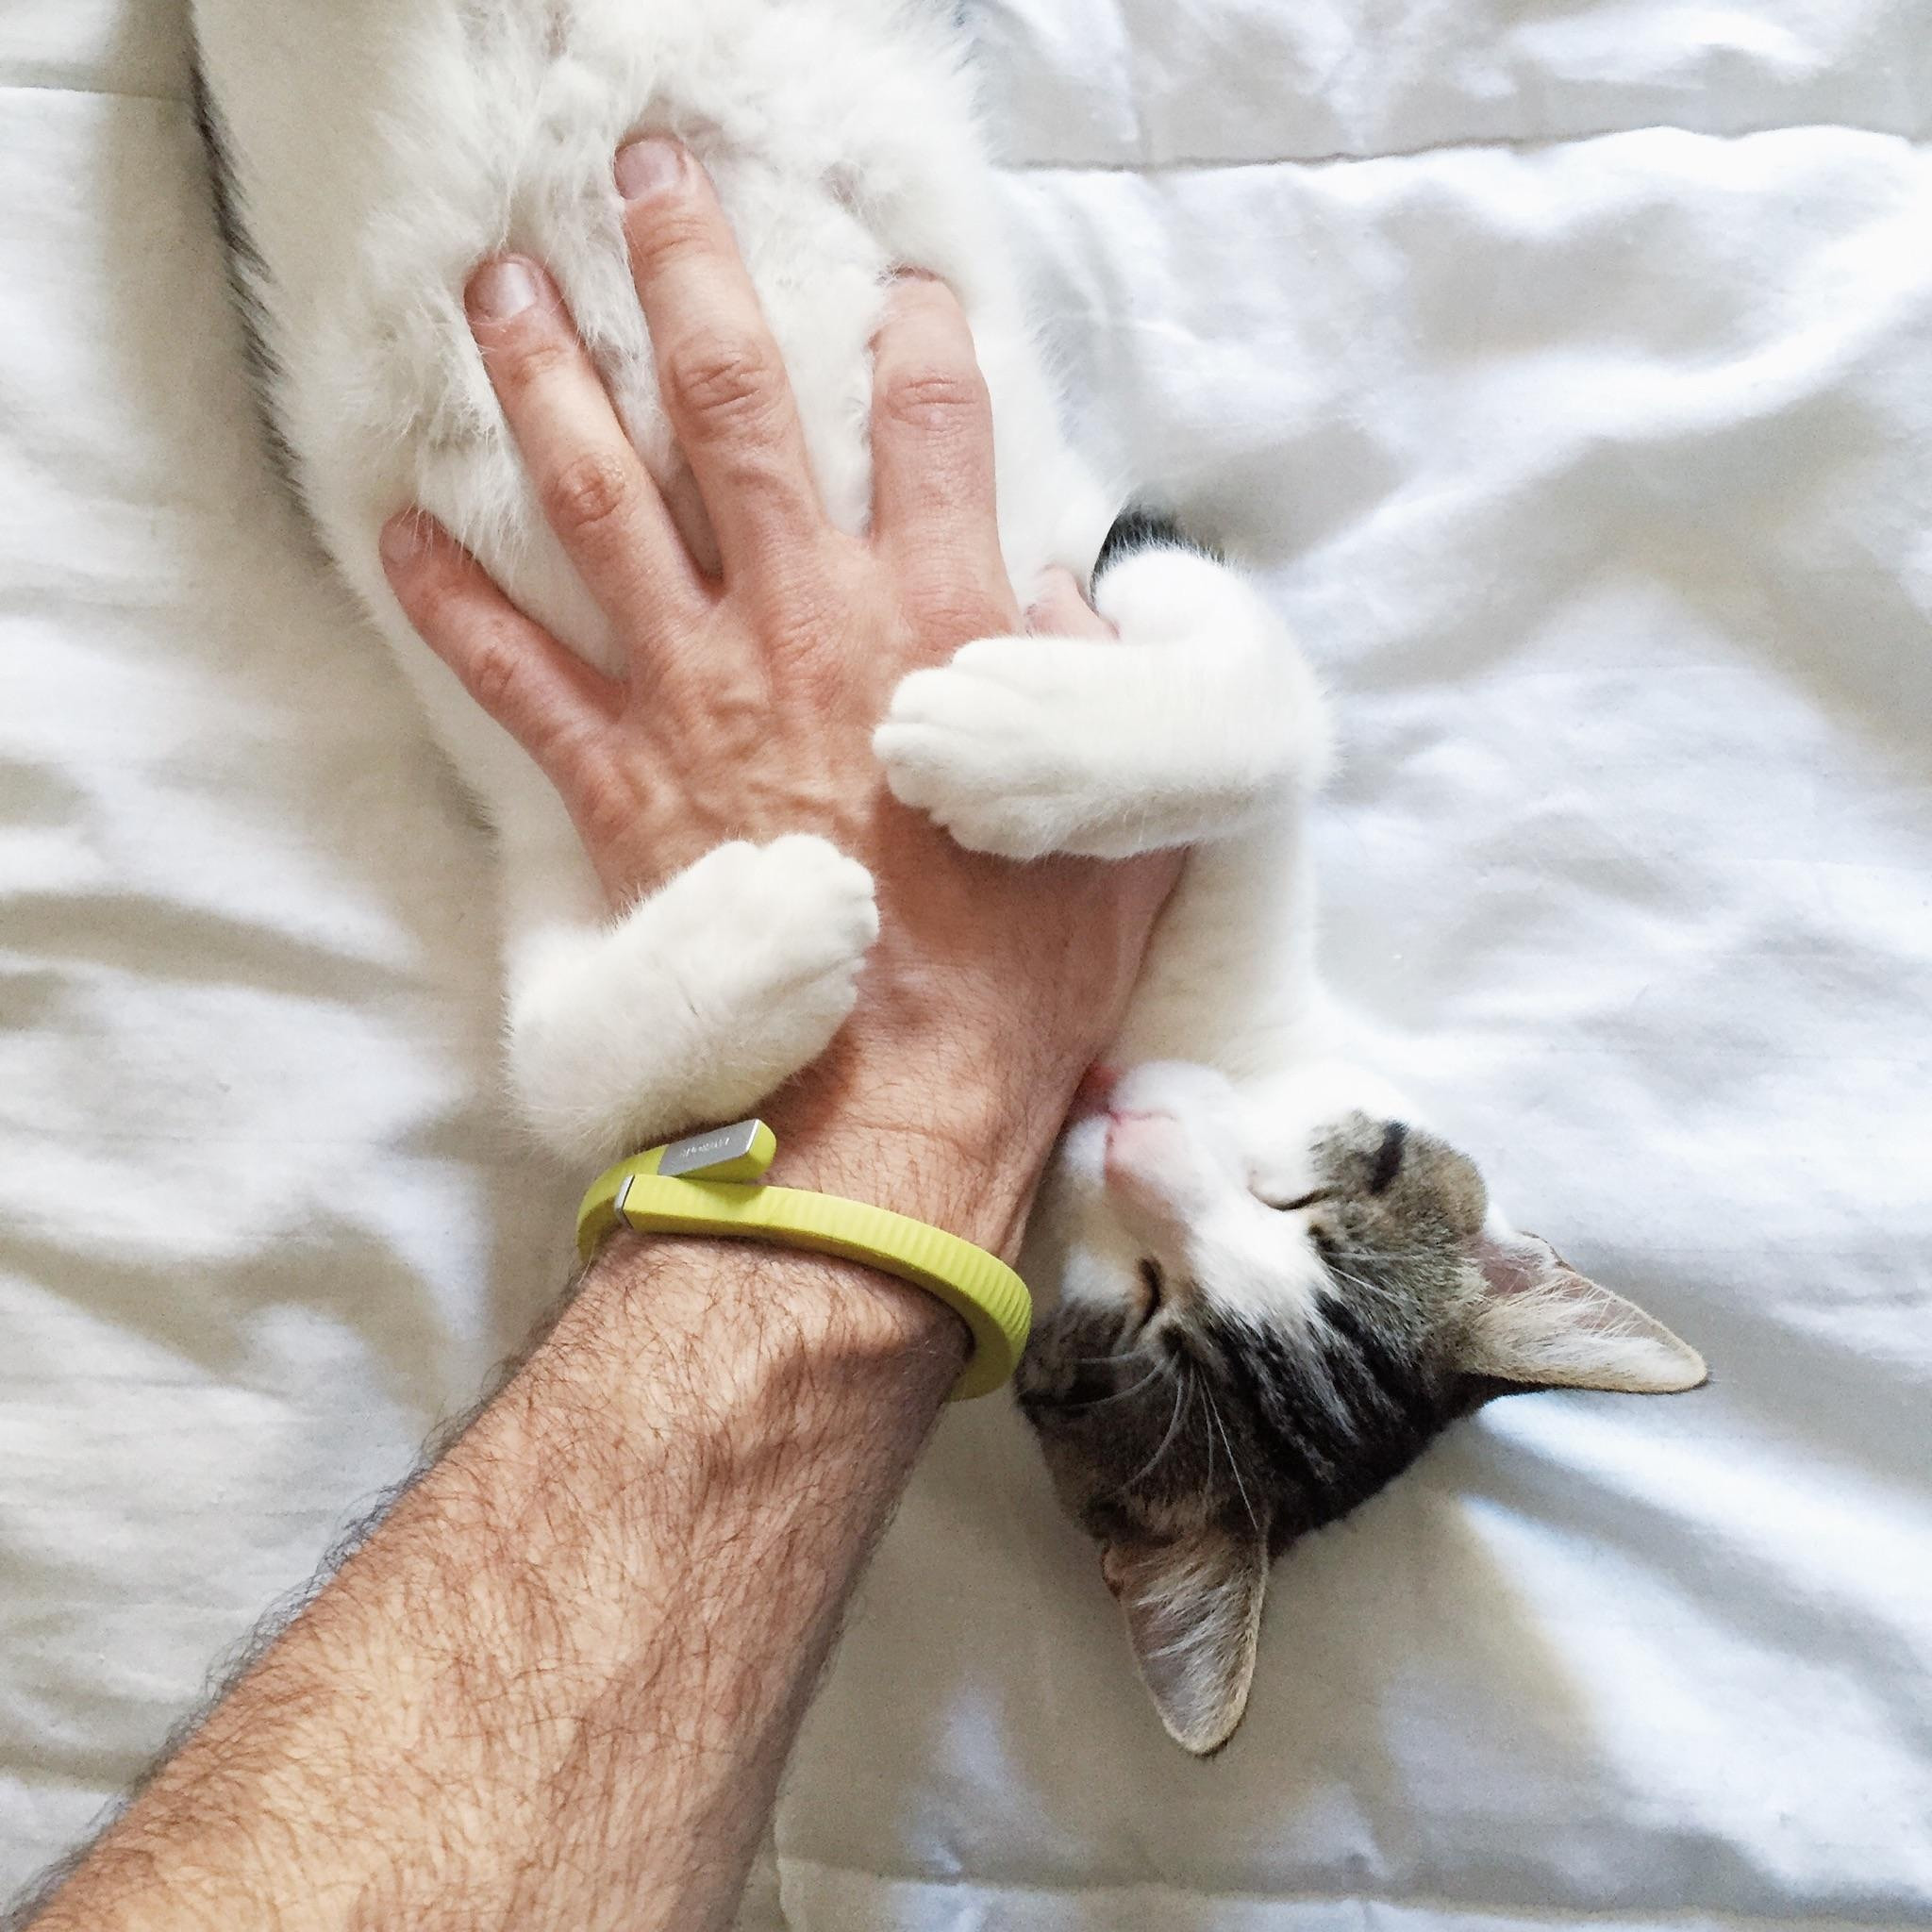 So You're Mixed Knowledge Brainiac? Prove It by Getting 18 on This Quiz Cat getting belly rub